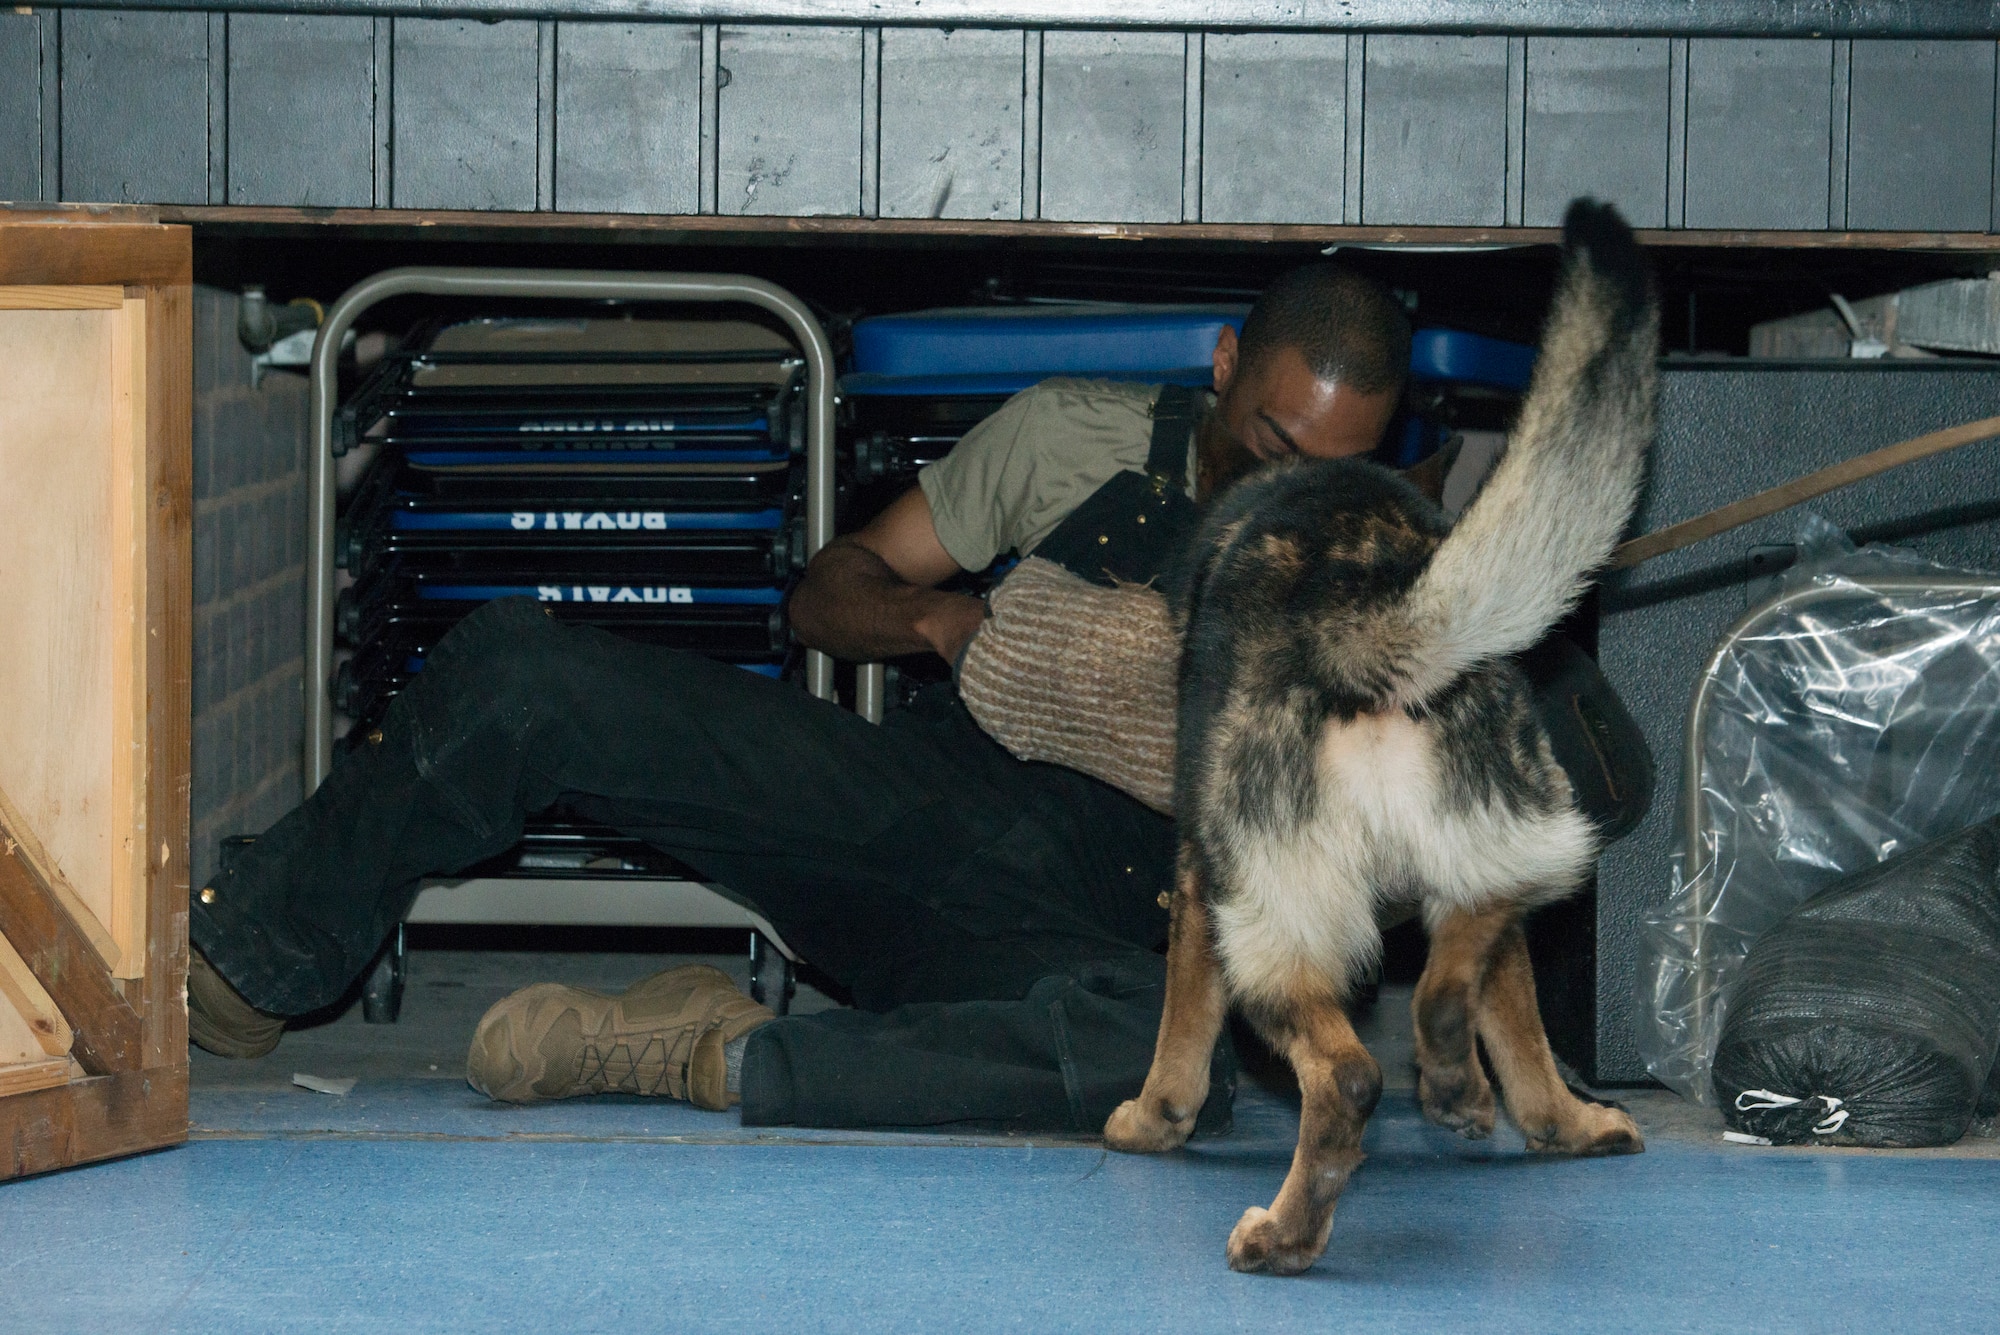 A photo of a dog finding a man under a stage.